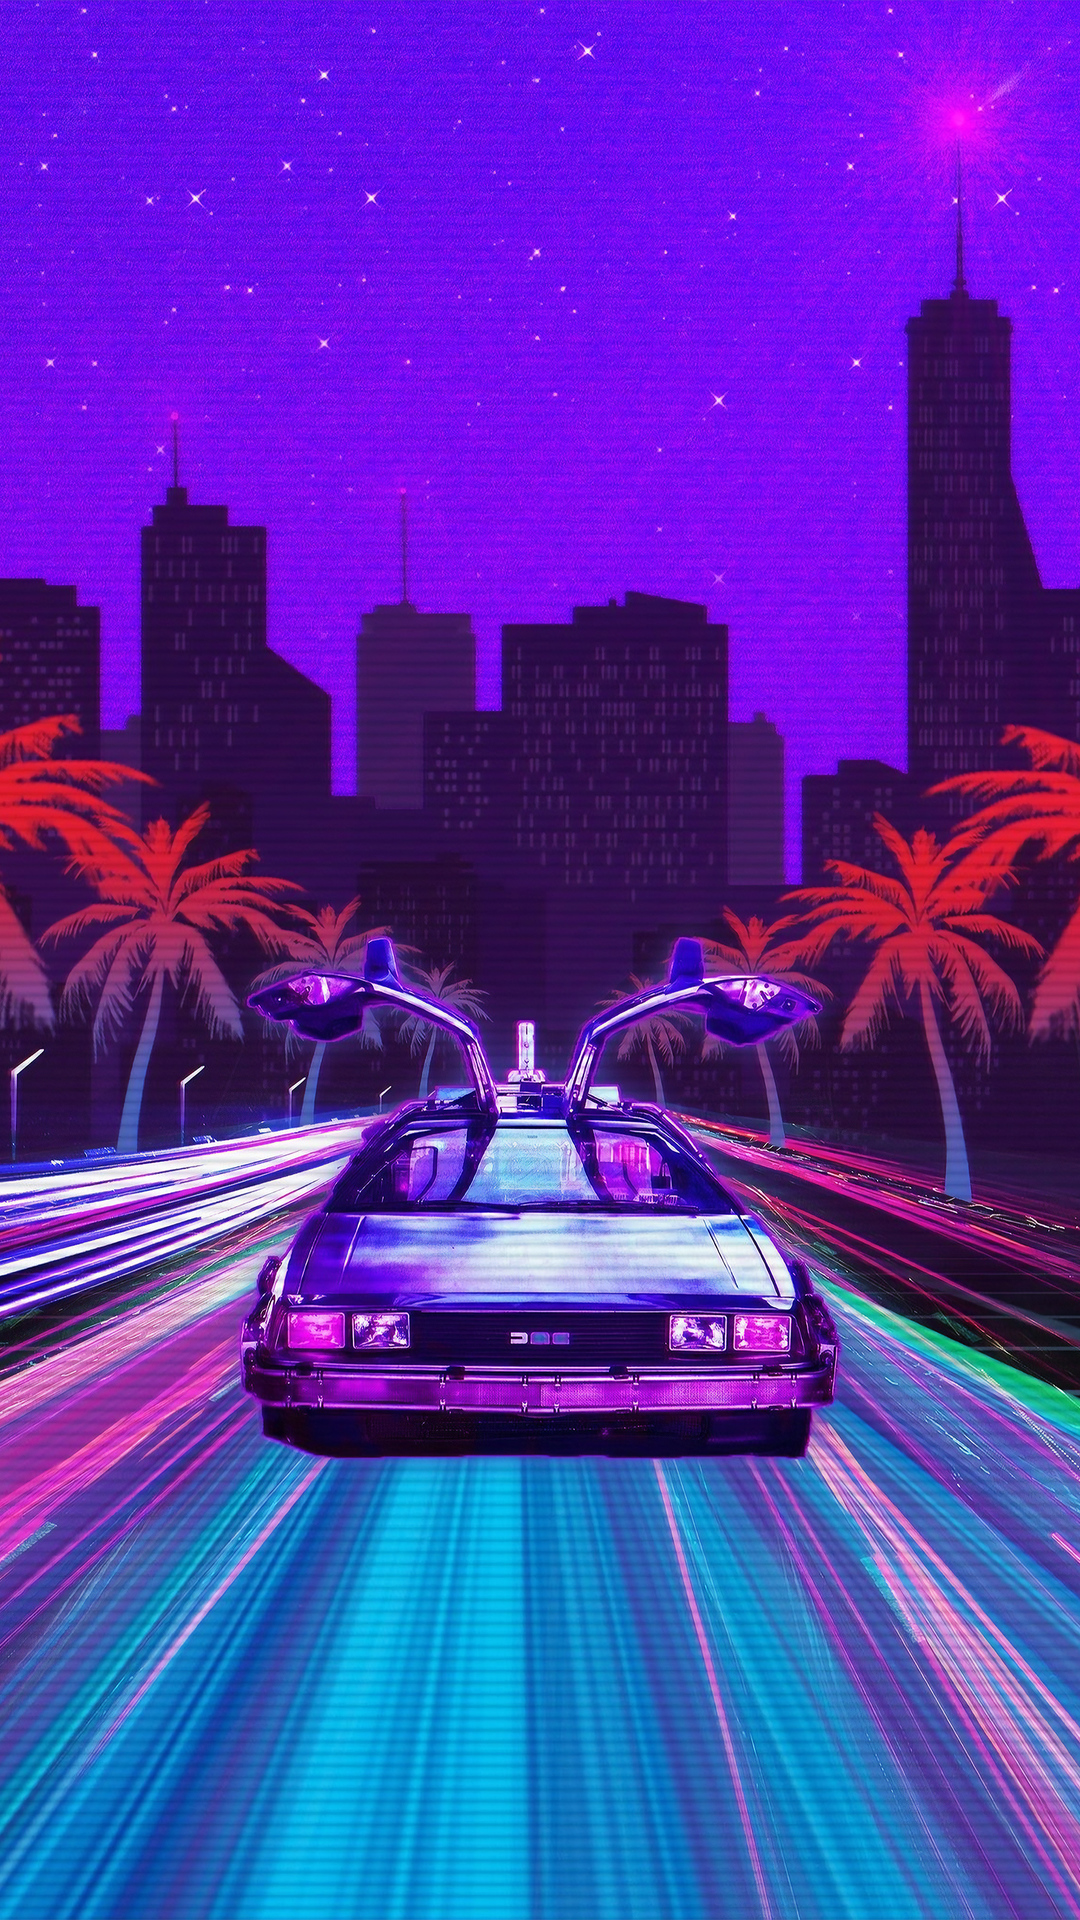 Aesthesic Vaporwave Wallpaper For Iphone Or Android - Retro Wallpaper 4k - HD Wallpaper 